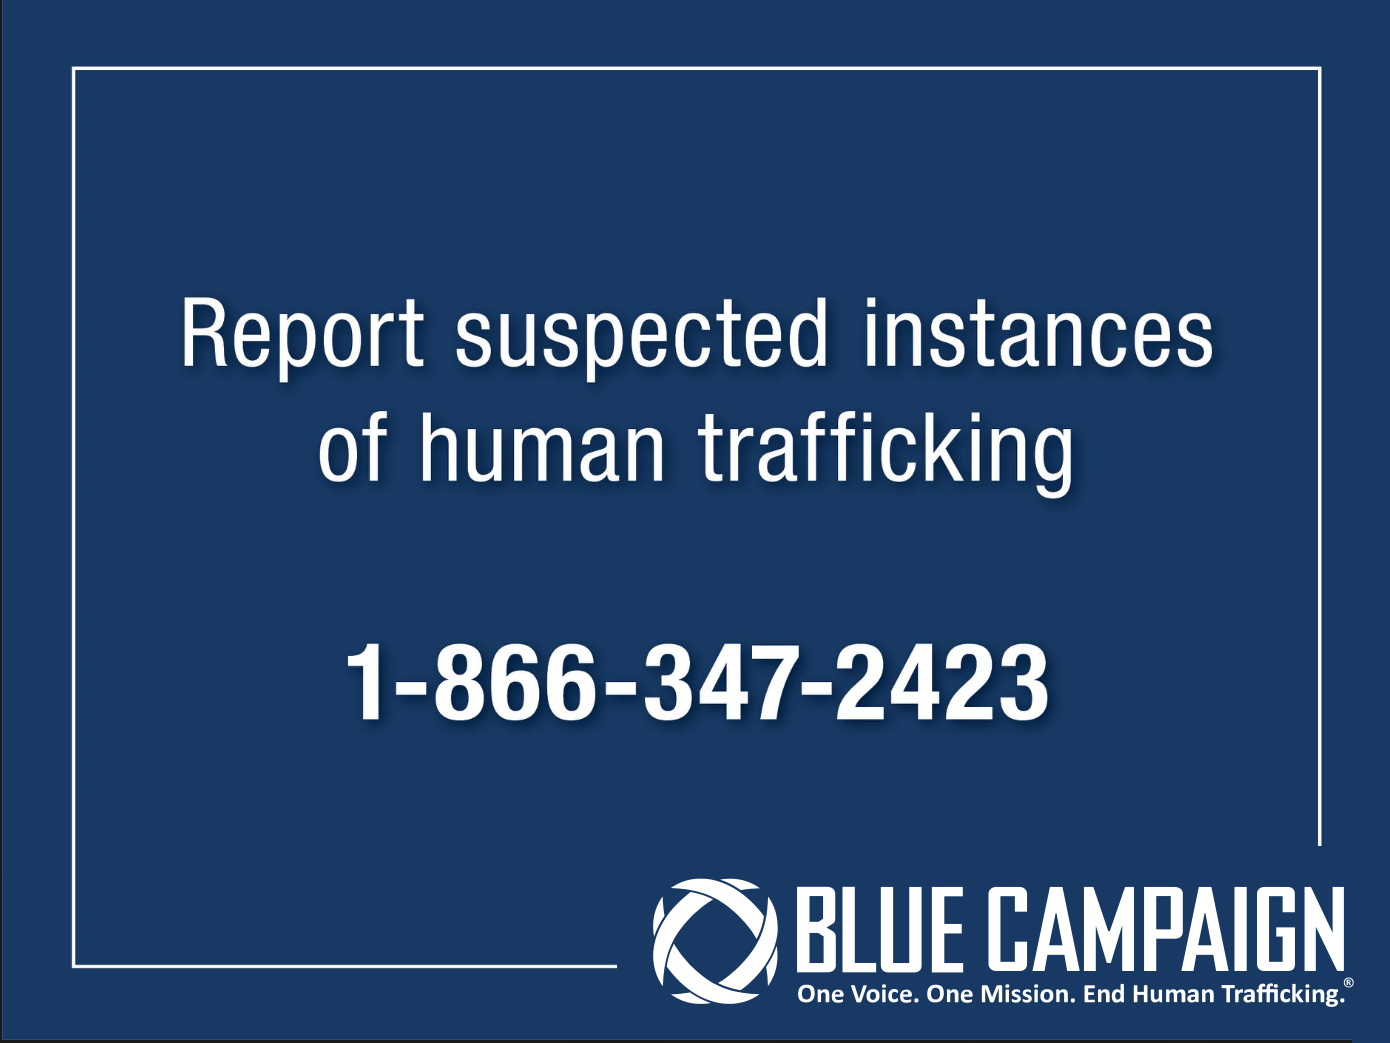 "Report suspected instances of human trafficking at 1-866-347-2423. Blue Campaign. One Voice. One Mission. End Human Trafficking